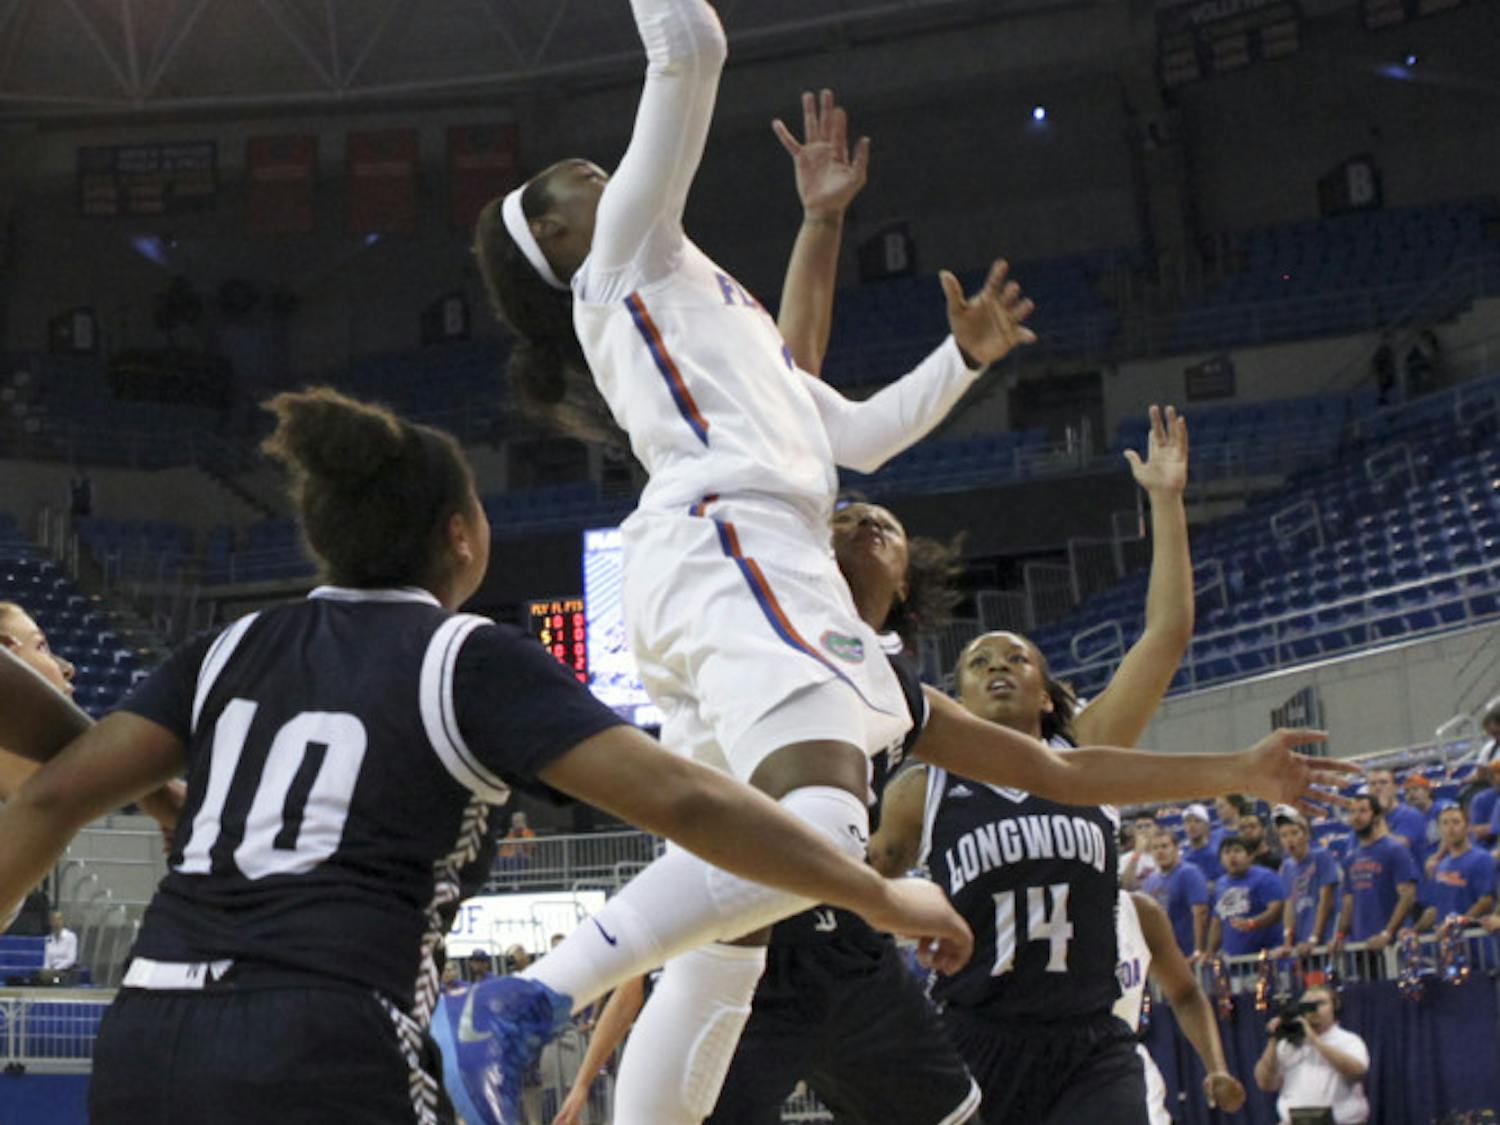 Ronni Williams goes up for a layup during Florida's win against Longwood on Nov. 17.